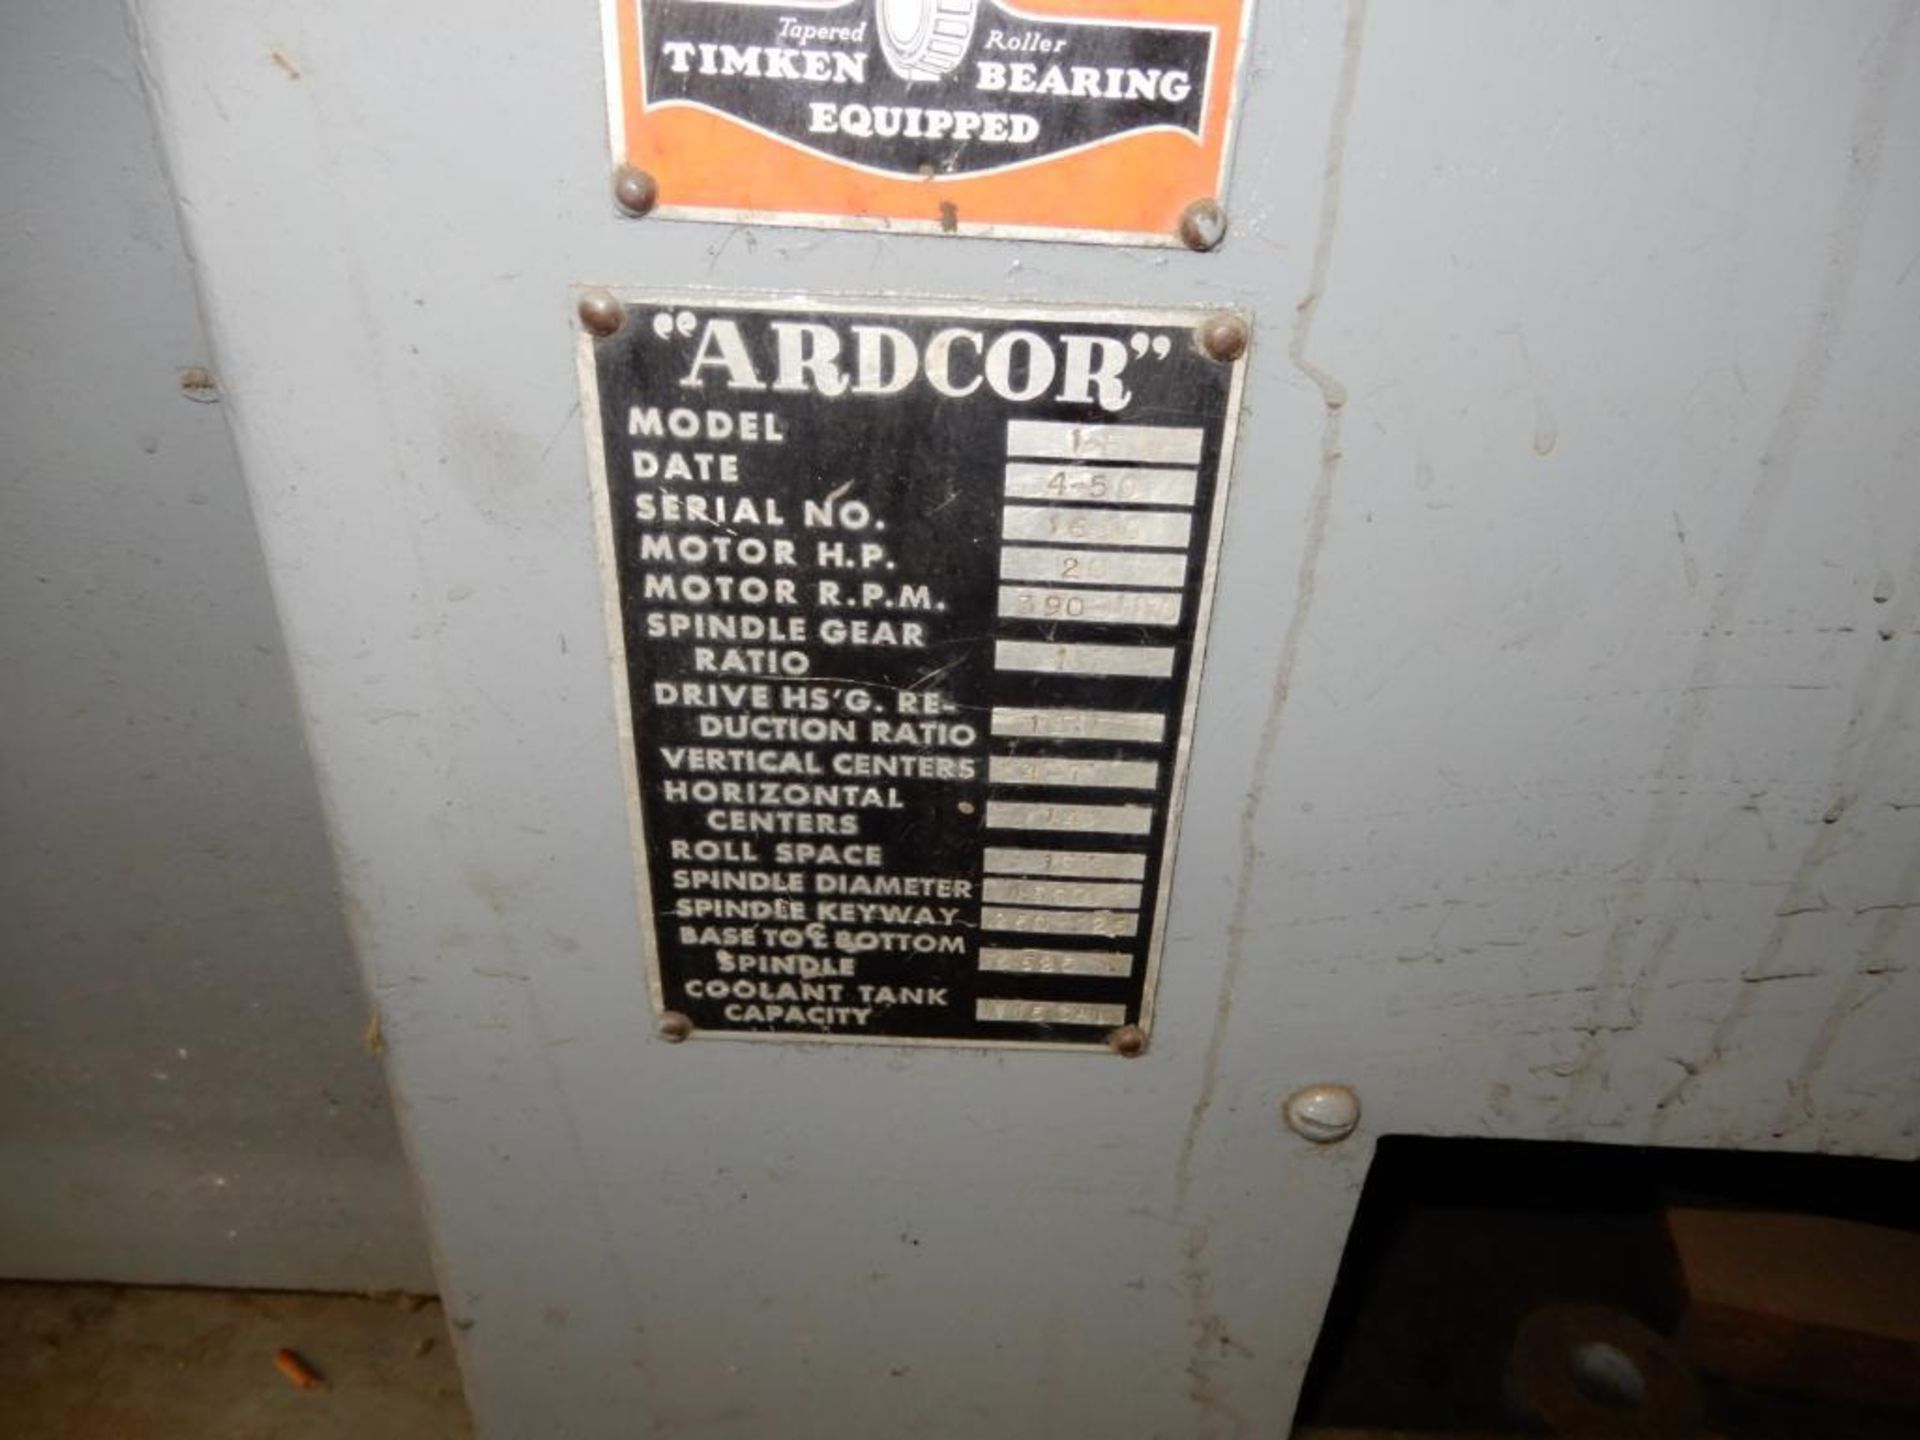 Ardcor 12-Shaft Roll Former Model 1-F, S/N 1655 (1959), 1.5 in. Shaft Dia., 10 in. Roll Space, 20 HP - Image 2 of 2